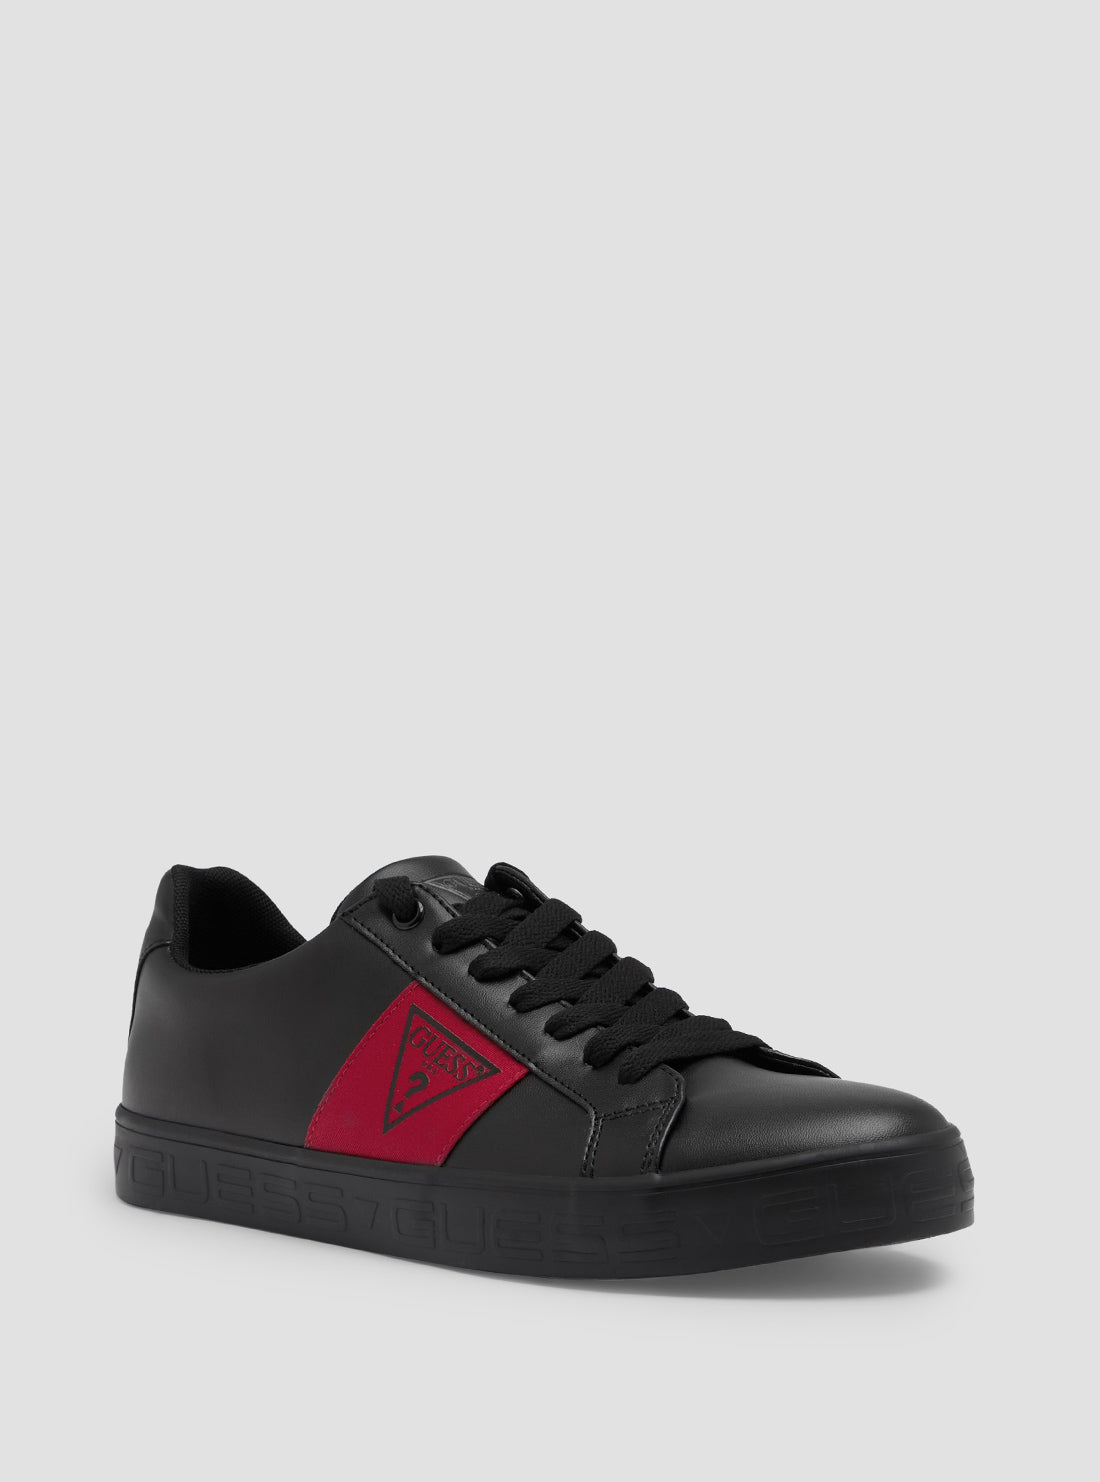 GUESS Men's Black Red Paschal Low Top Sneakers PASCHAL Front View